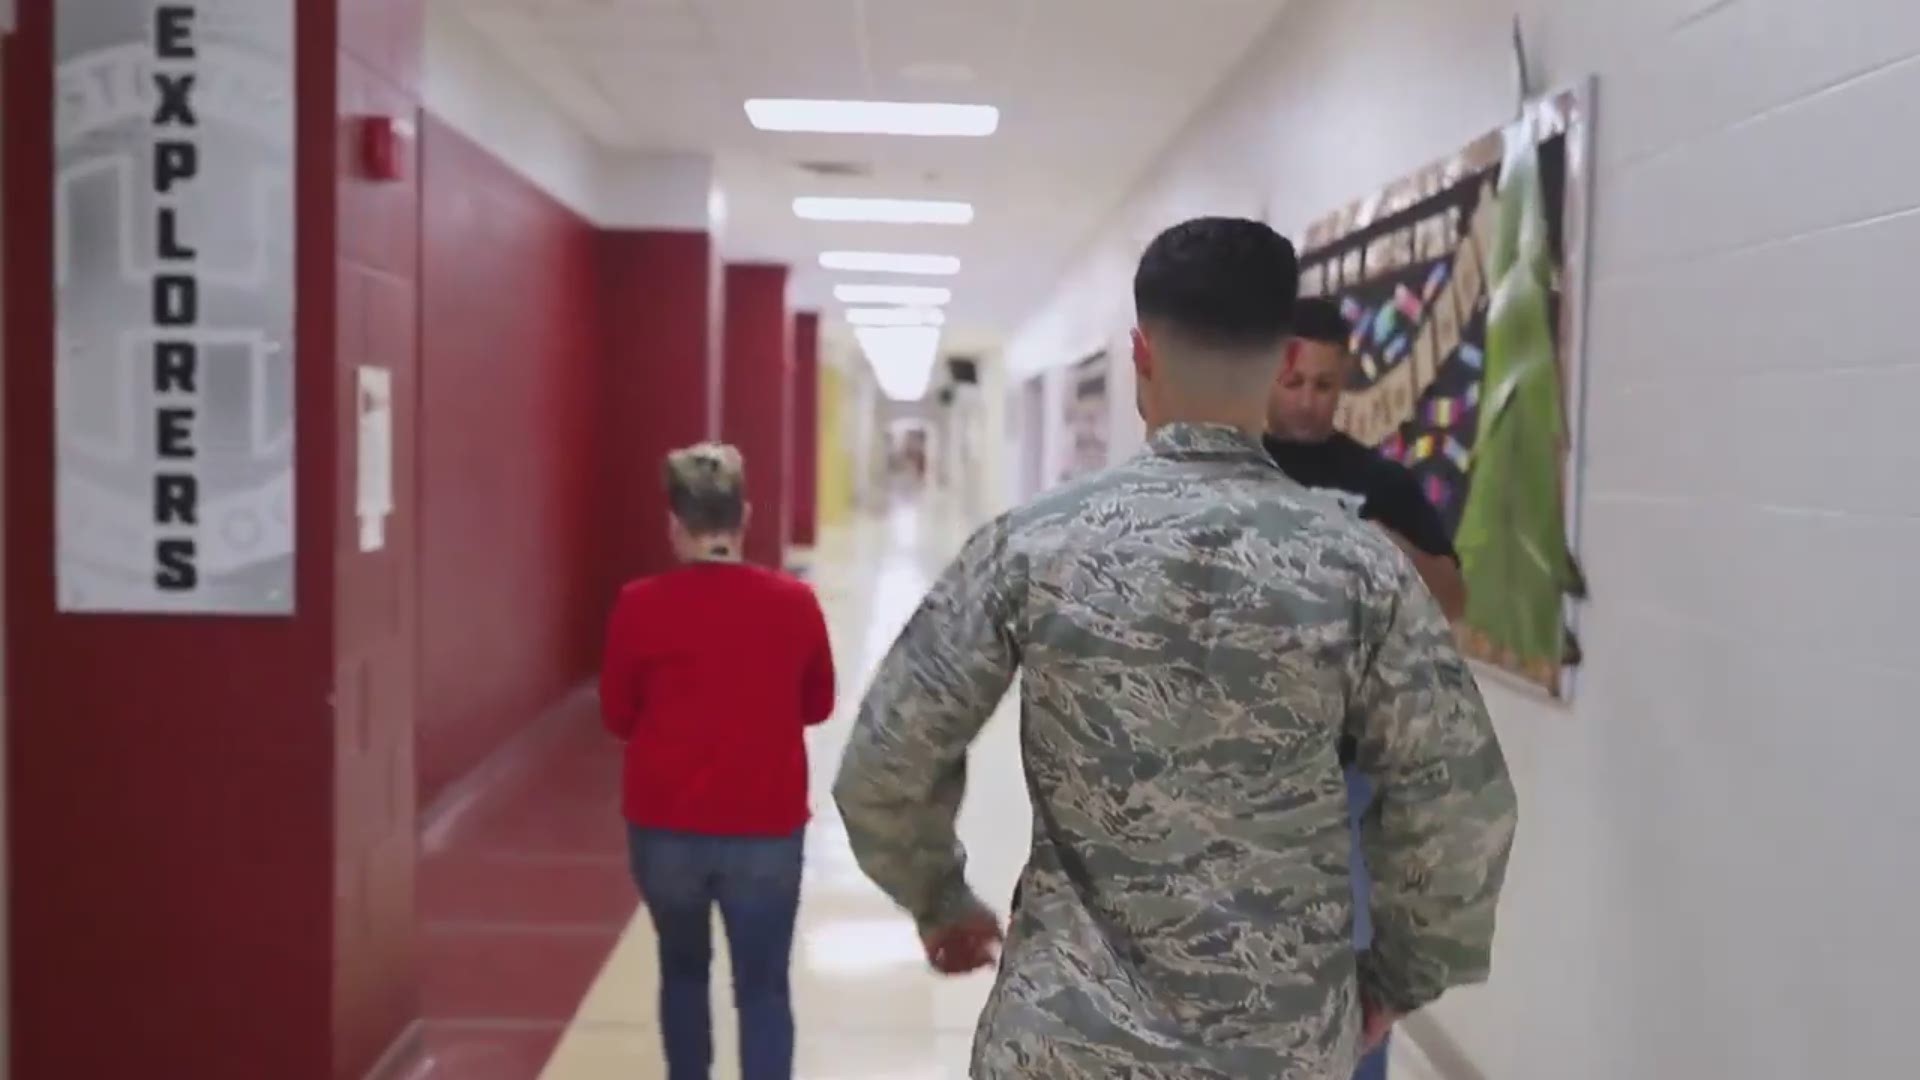 Airman Jared Pena returned home and decided to surprise his little sister and brother by showing up to their classrooms and the reactions were beautiful.